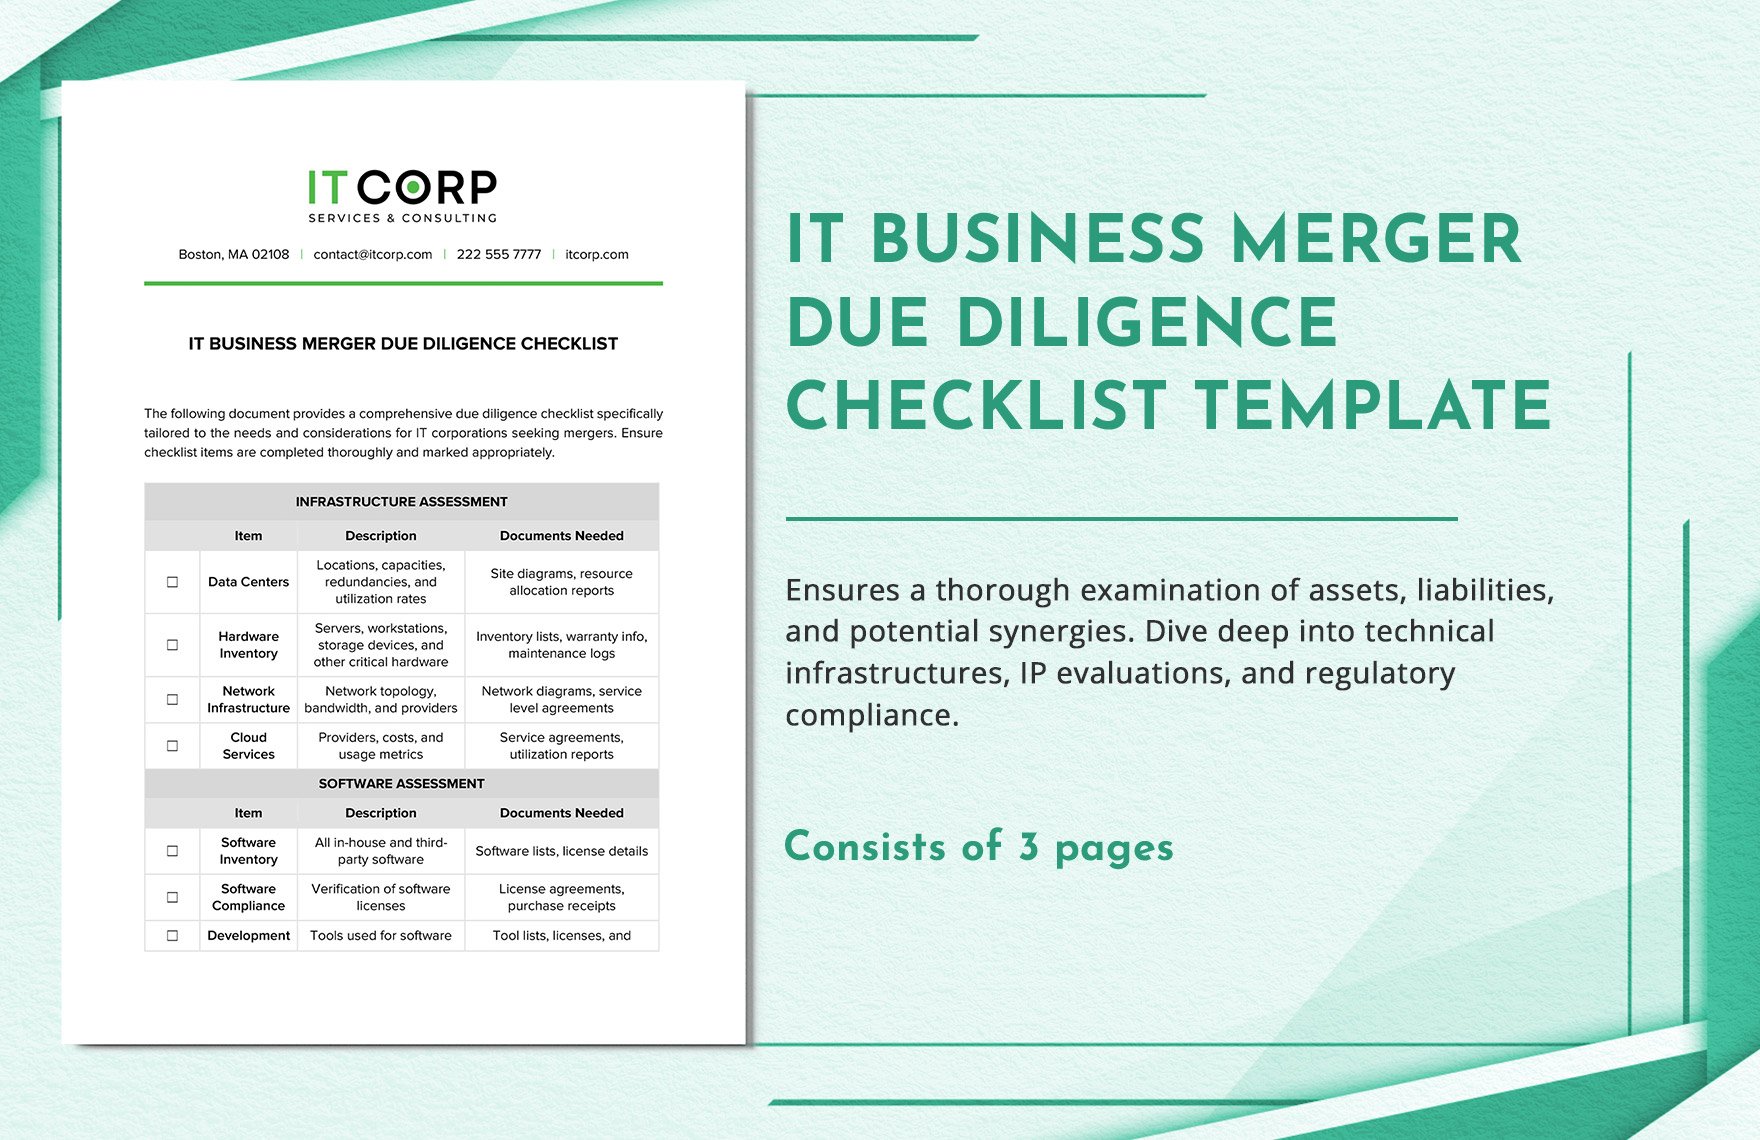 IT Business Merger Due Diligence Checklist Template in Word, Google Docs, PDF